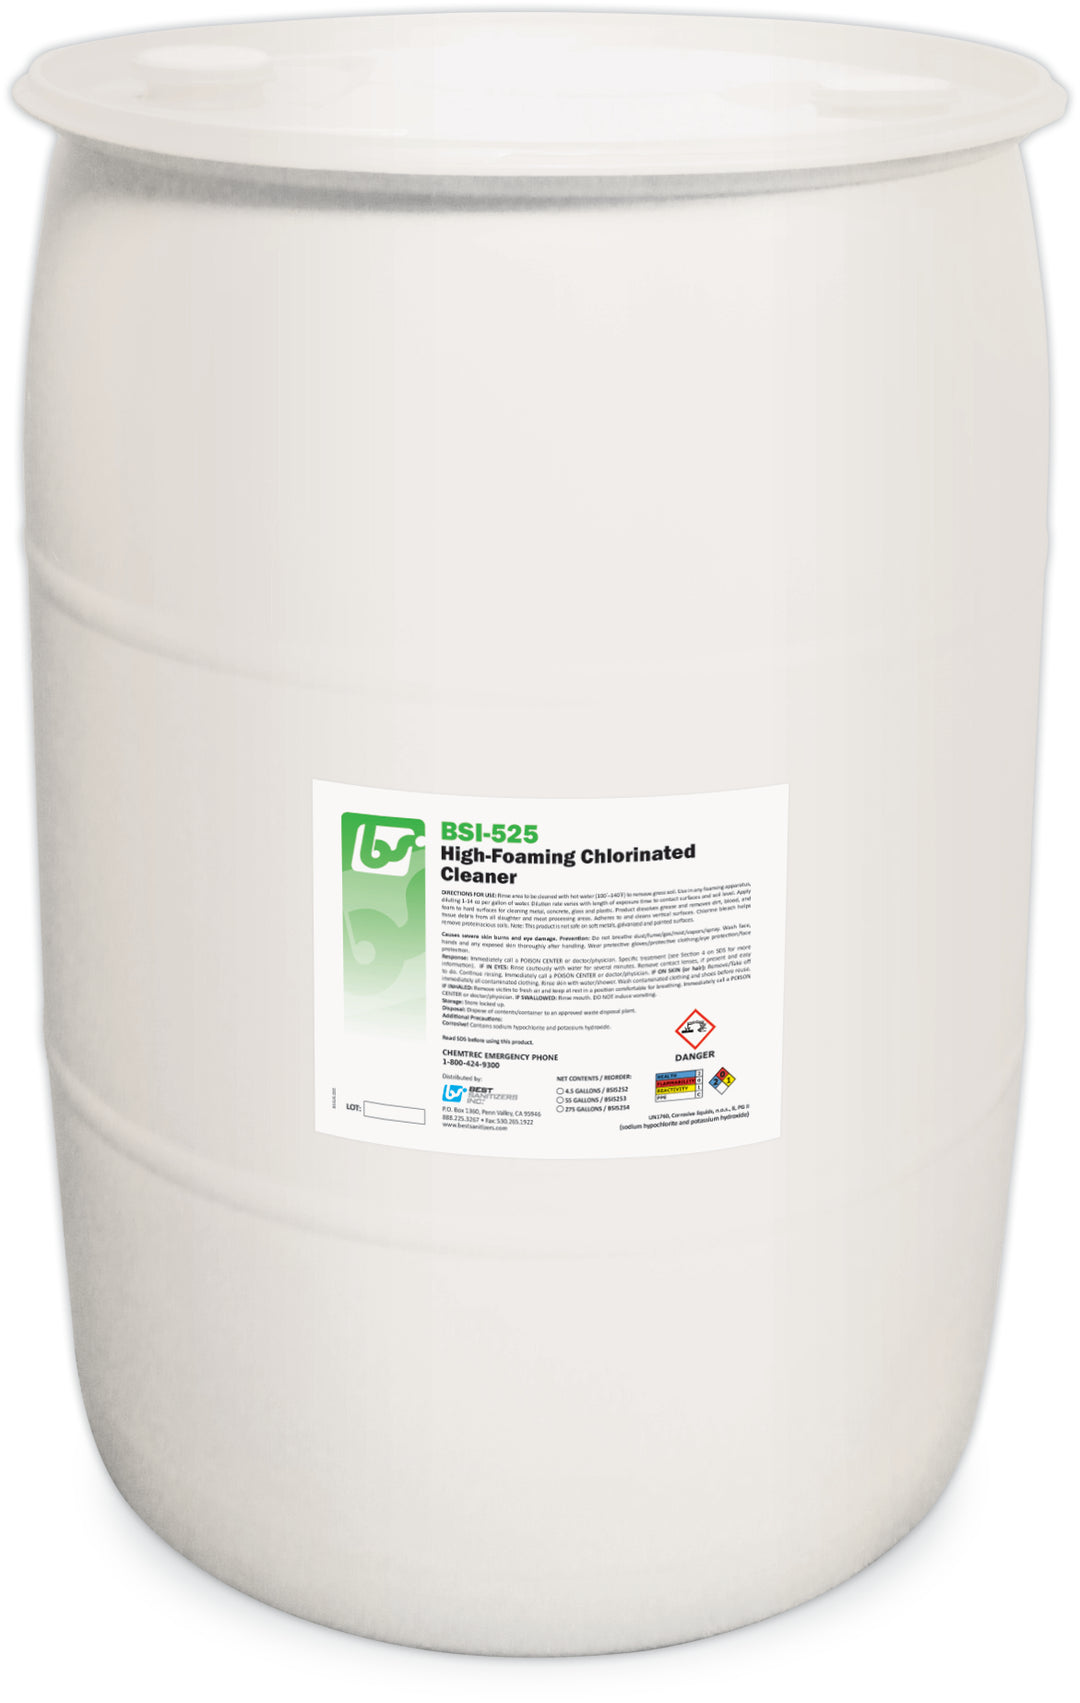 A 55 Gallon Drum of BSI-525 High-Foaming Chlorinated Cleaner.